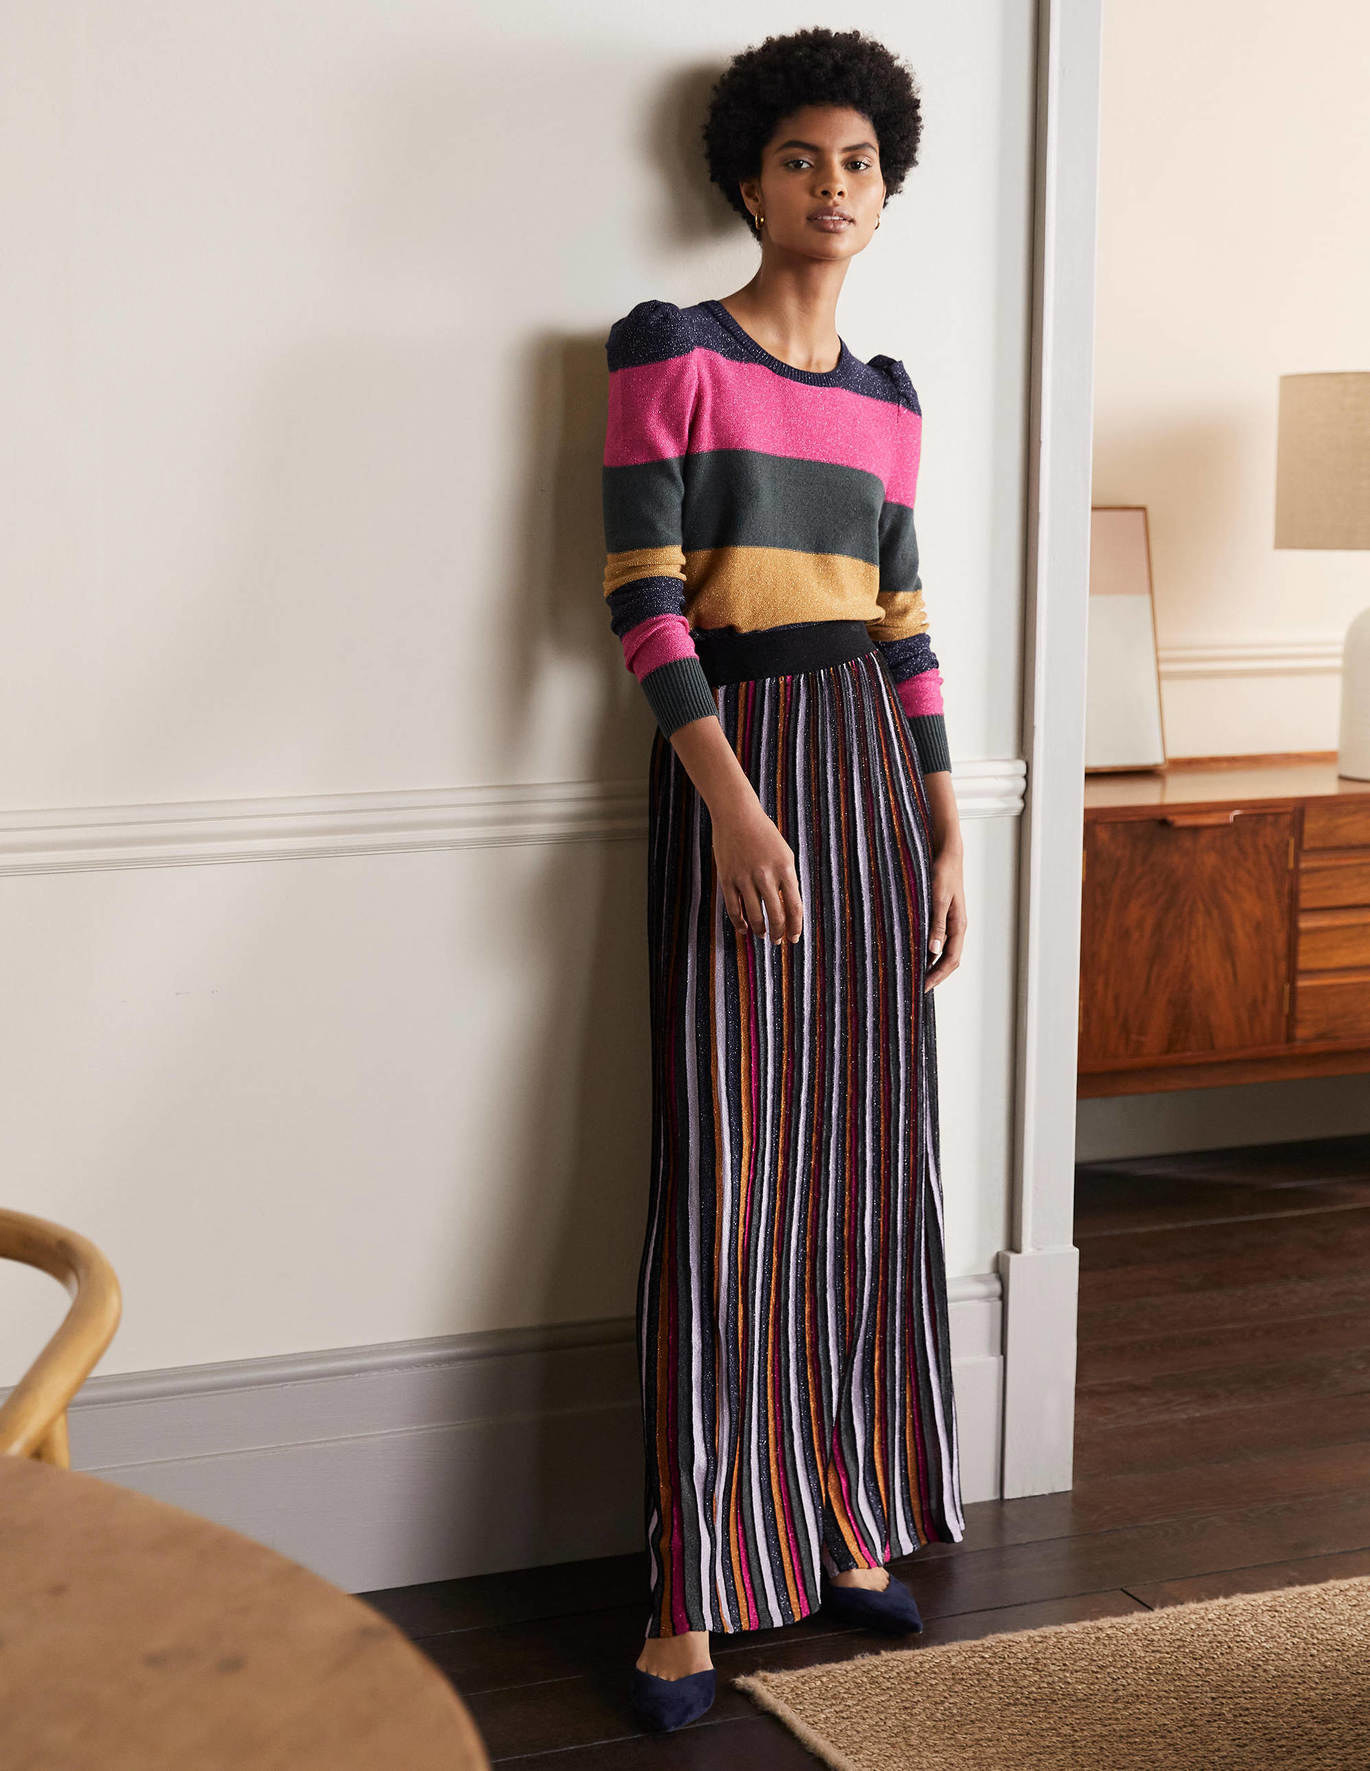 model wearing striped multicolor skirt, leaning against the wall in a house